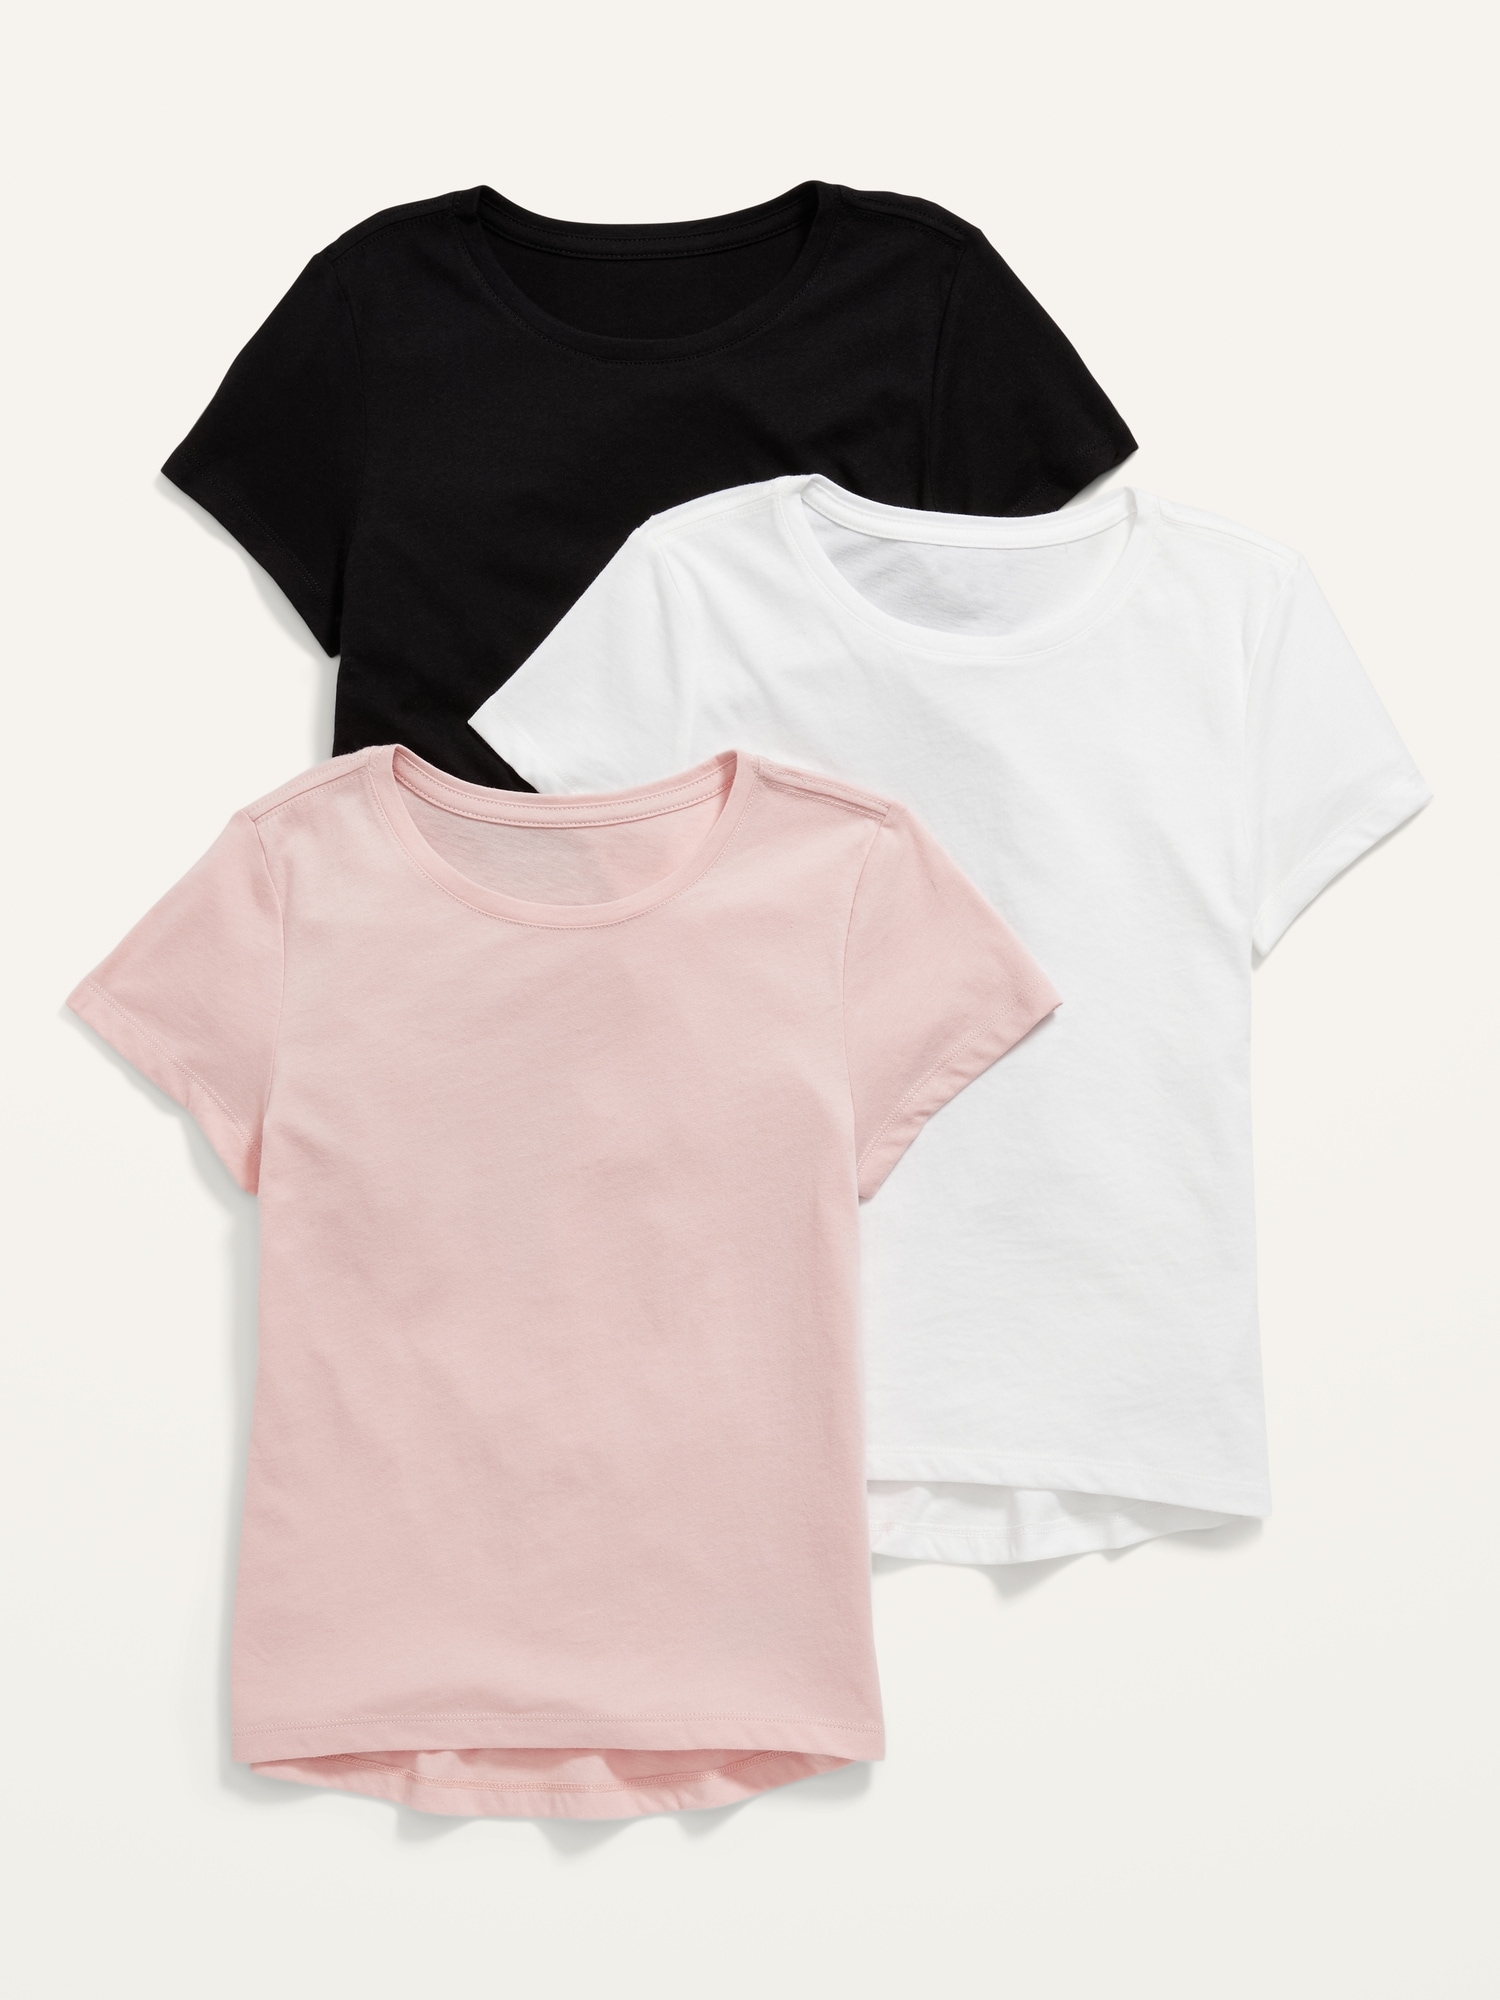 Softest Short-Sleeve Solid T-Shirt 3-Pack for Girls Hot Deal